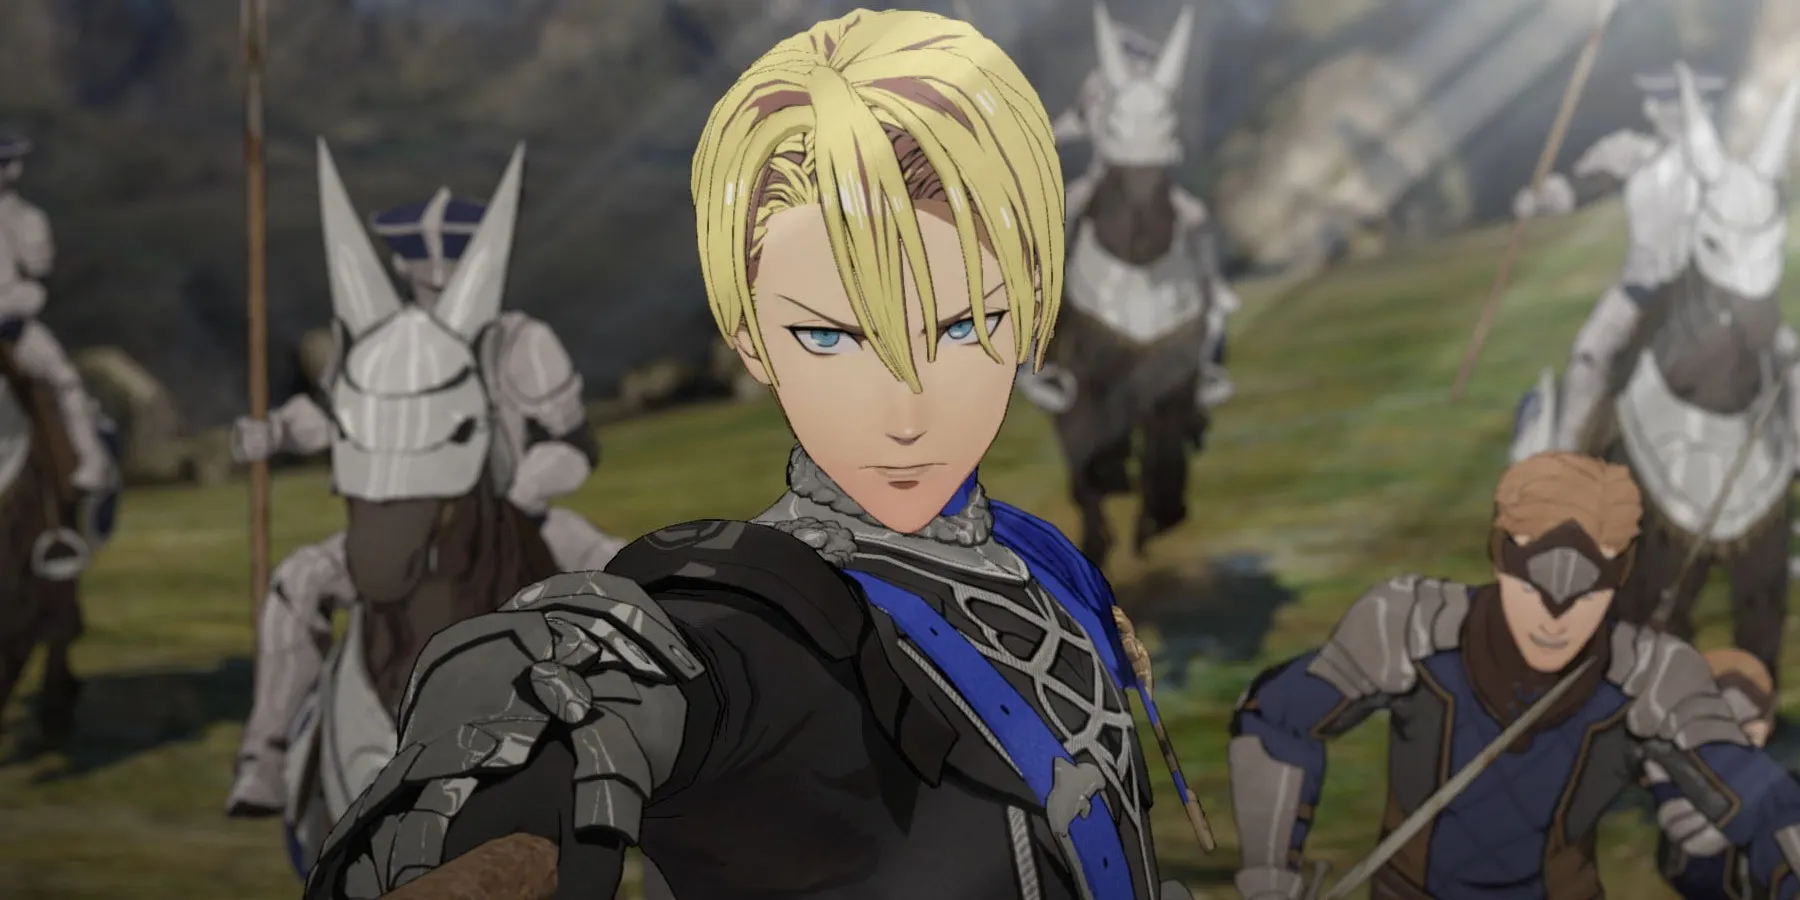 Fire Emblem: Three Houses - Tactical battles and personal connections